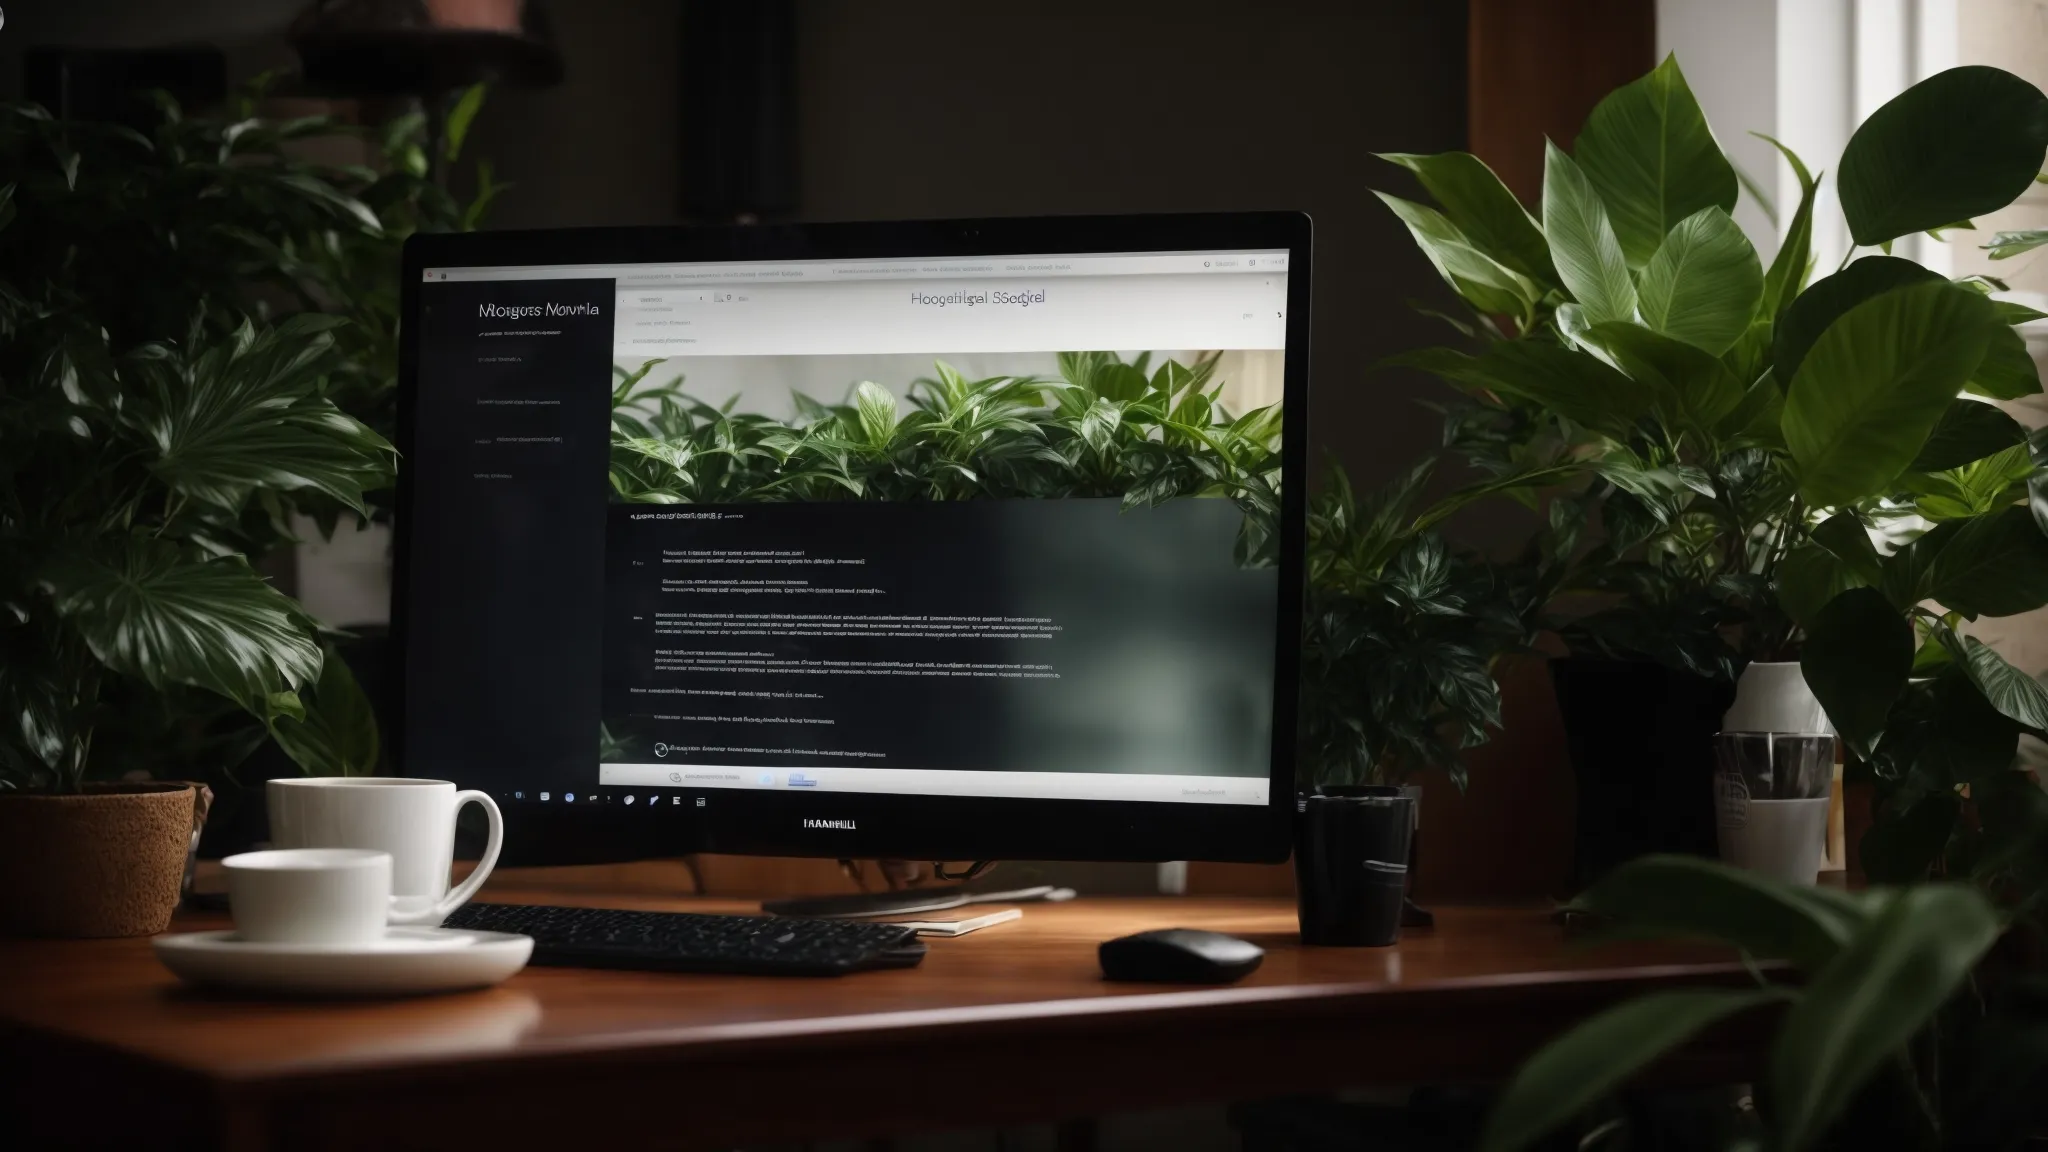 a desktop computer with a search engine results page displayed on the screen, surrounded by a plant, a mug of coffee, and a pair of glasses.